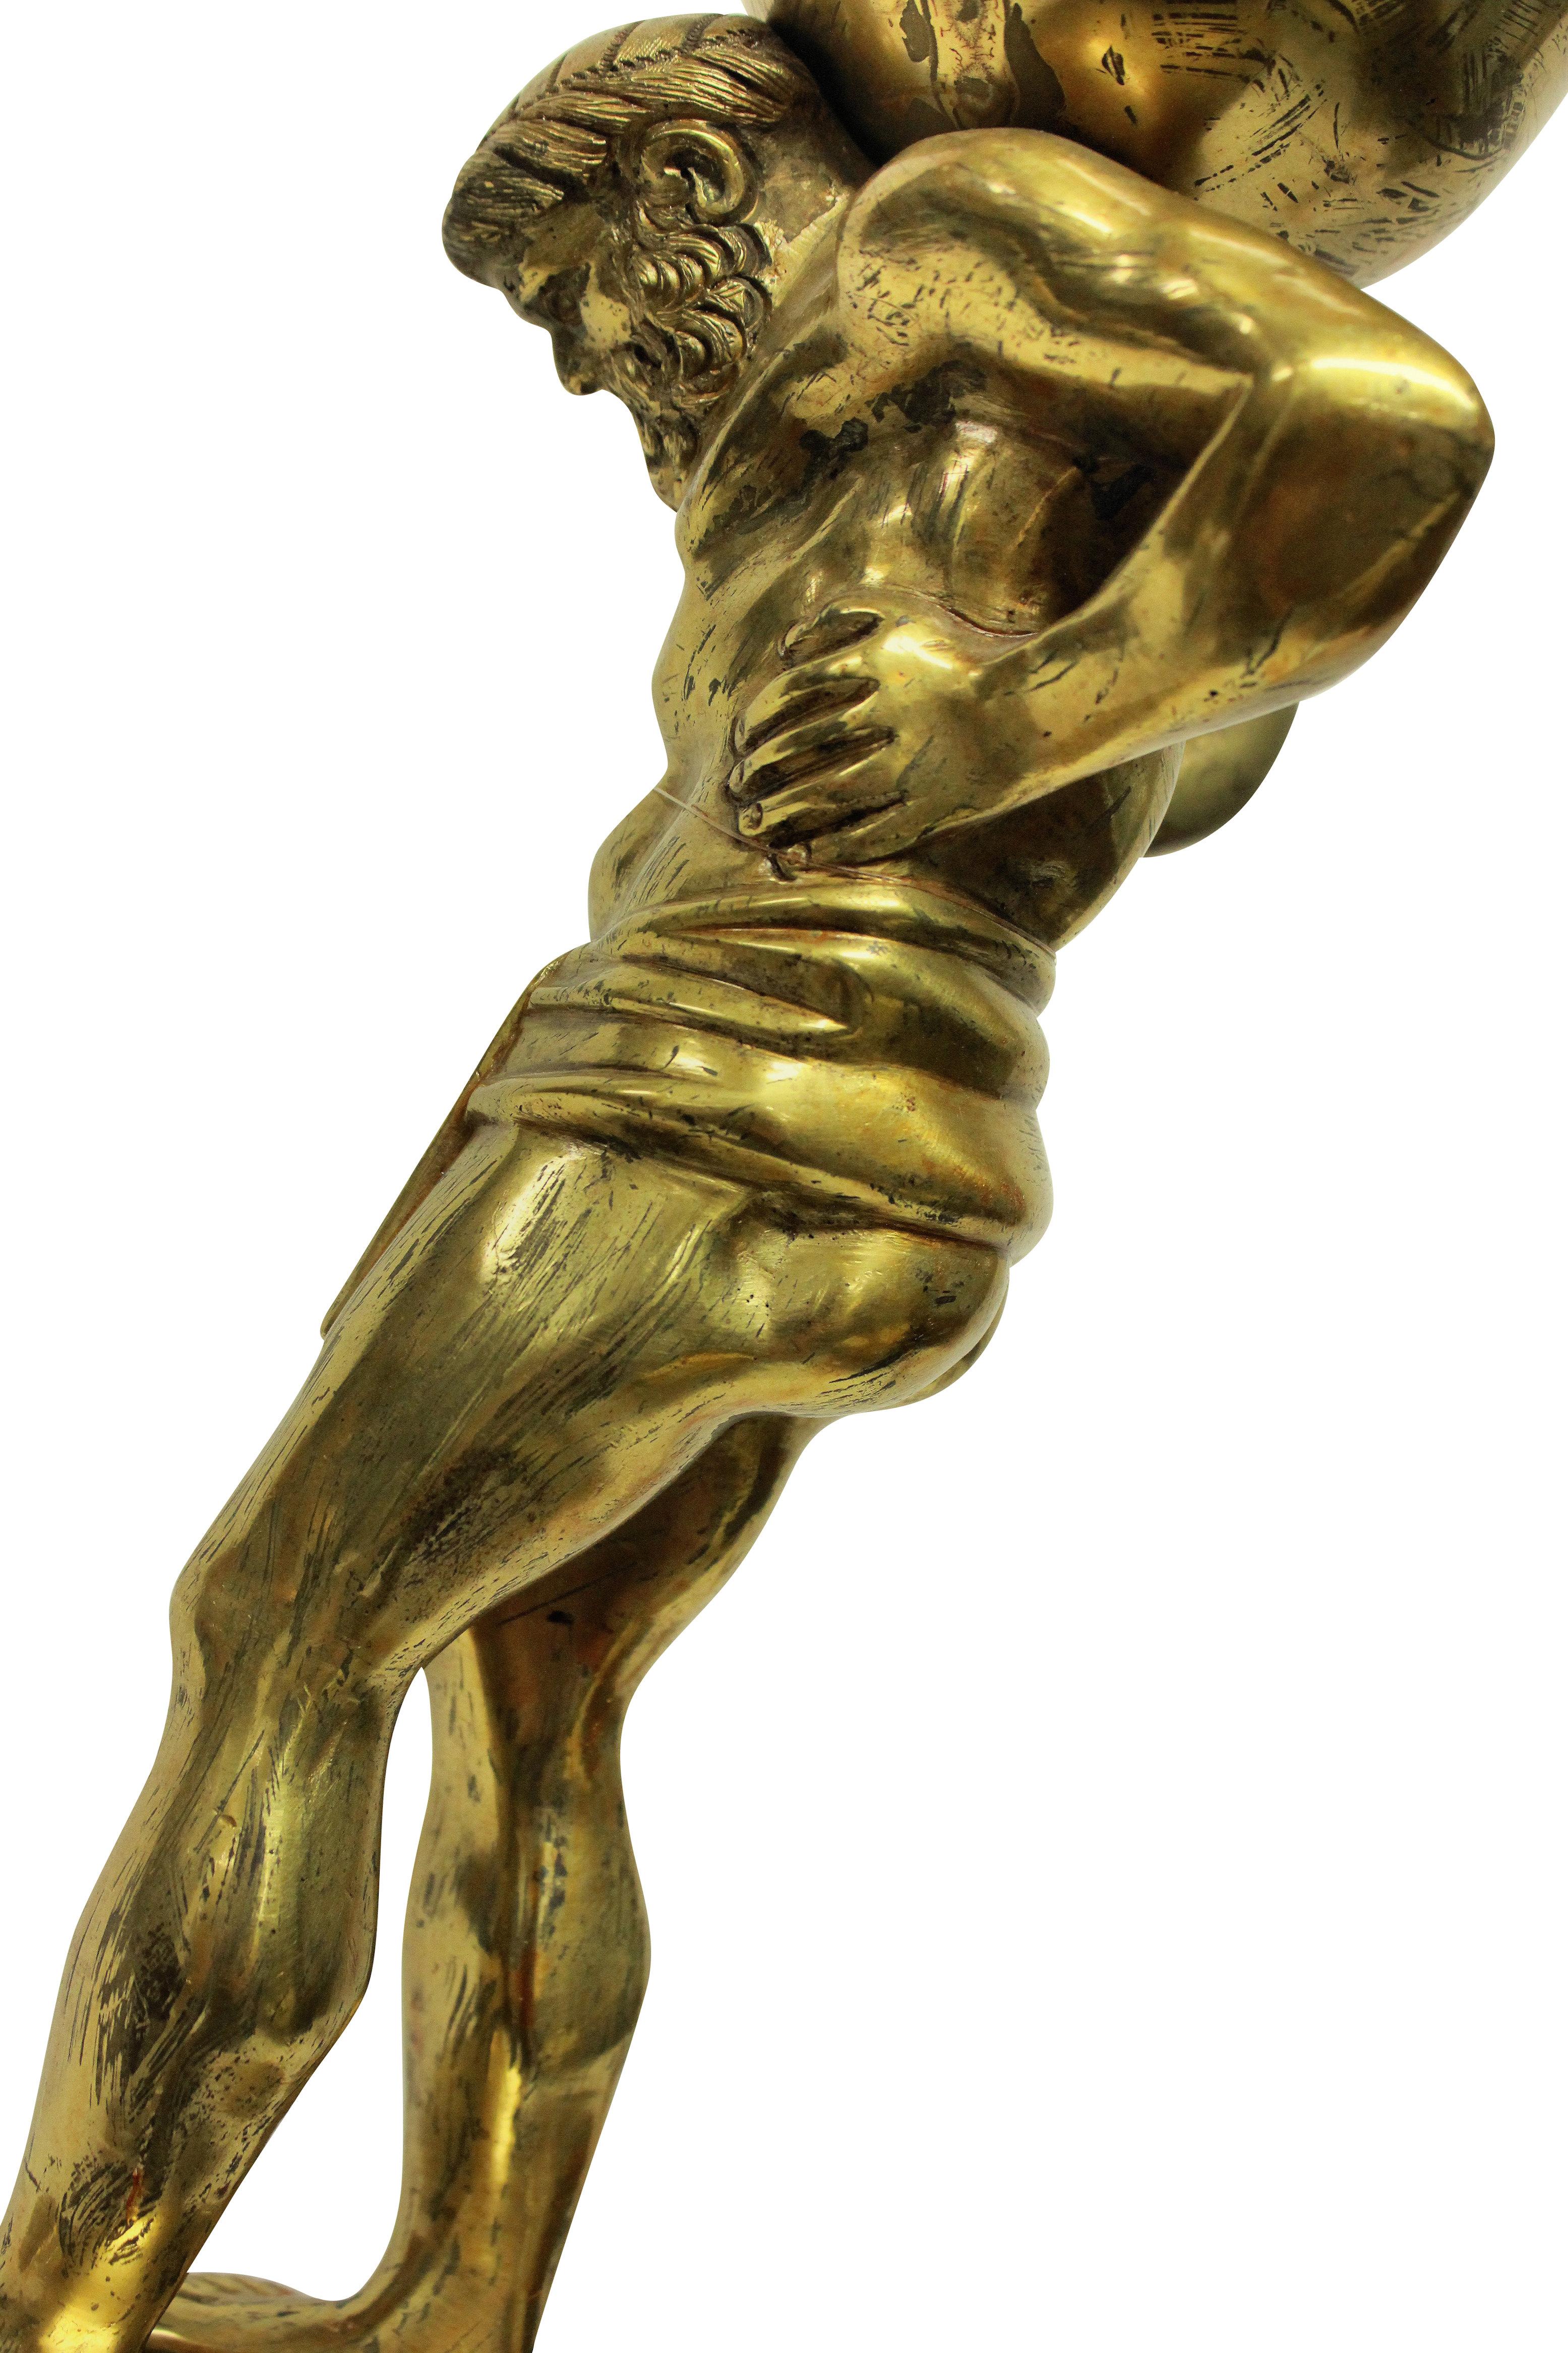 A fine English gilt bronze lamp depicting Atlas, holding up the earth. Formerly for oil, now electrified.